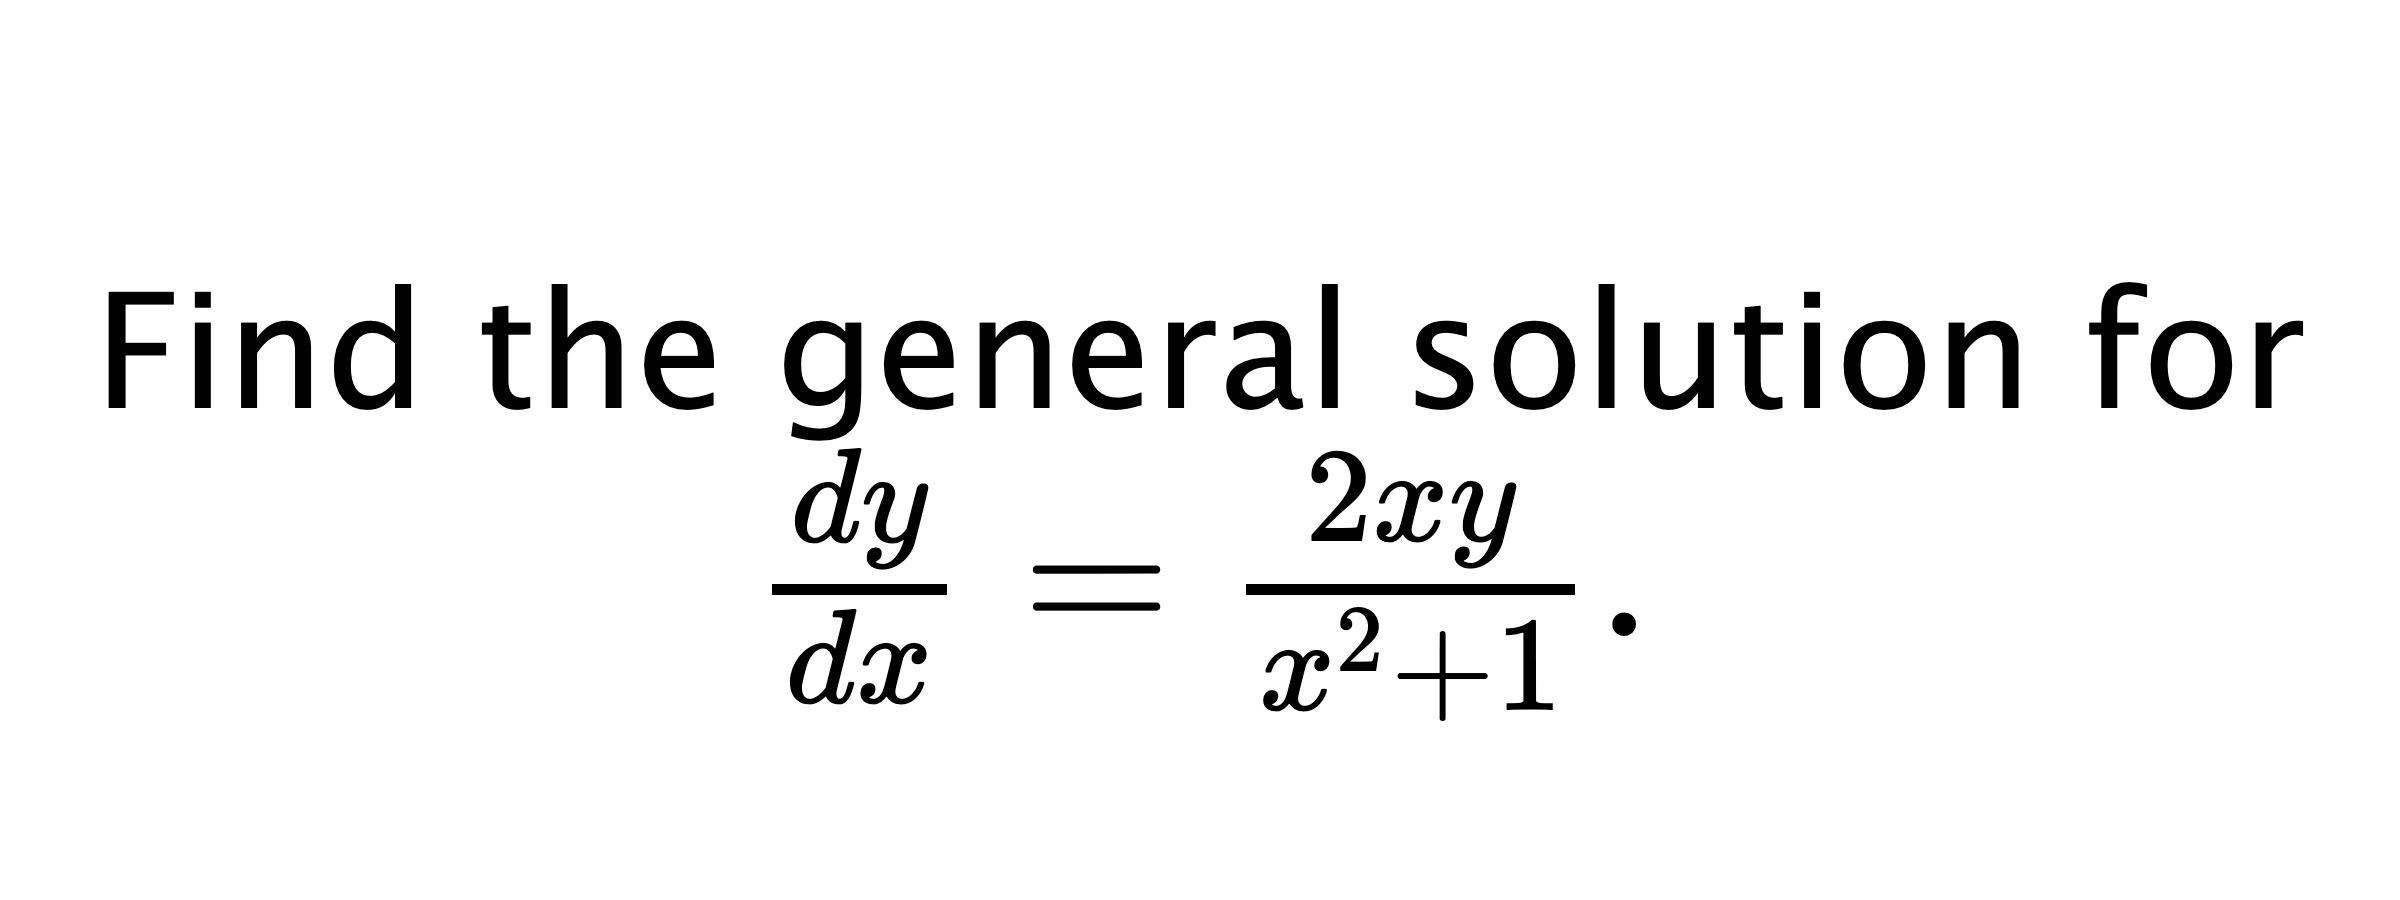  Find the general solution for $ \frac{dy}{dx}=\frac{2xy}{x^{2}+1}. $